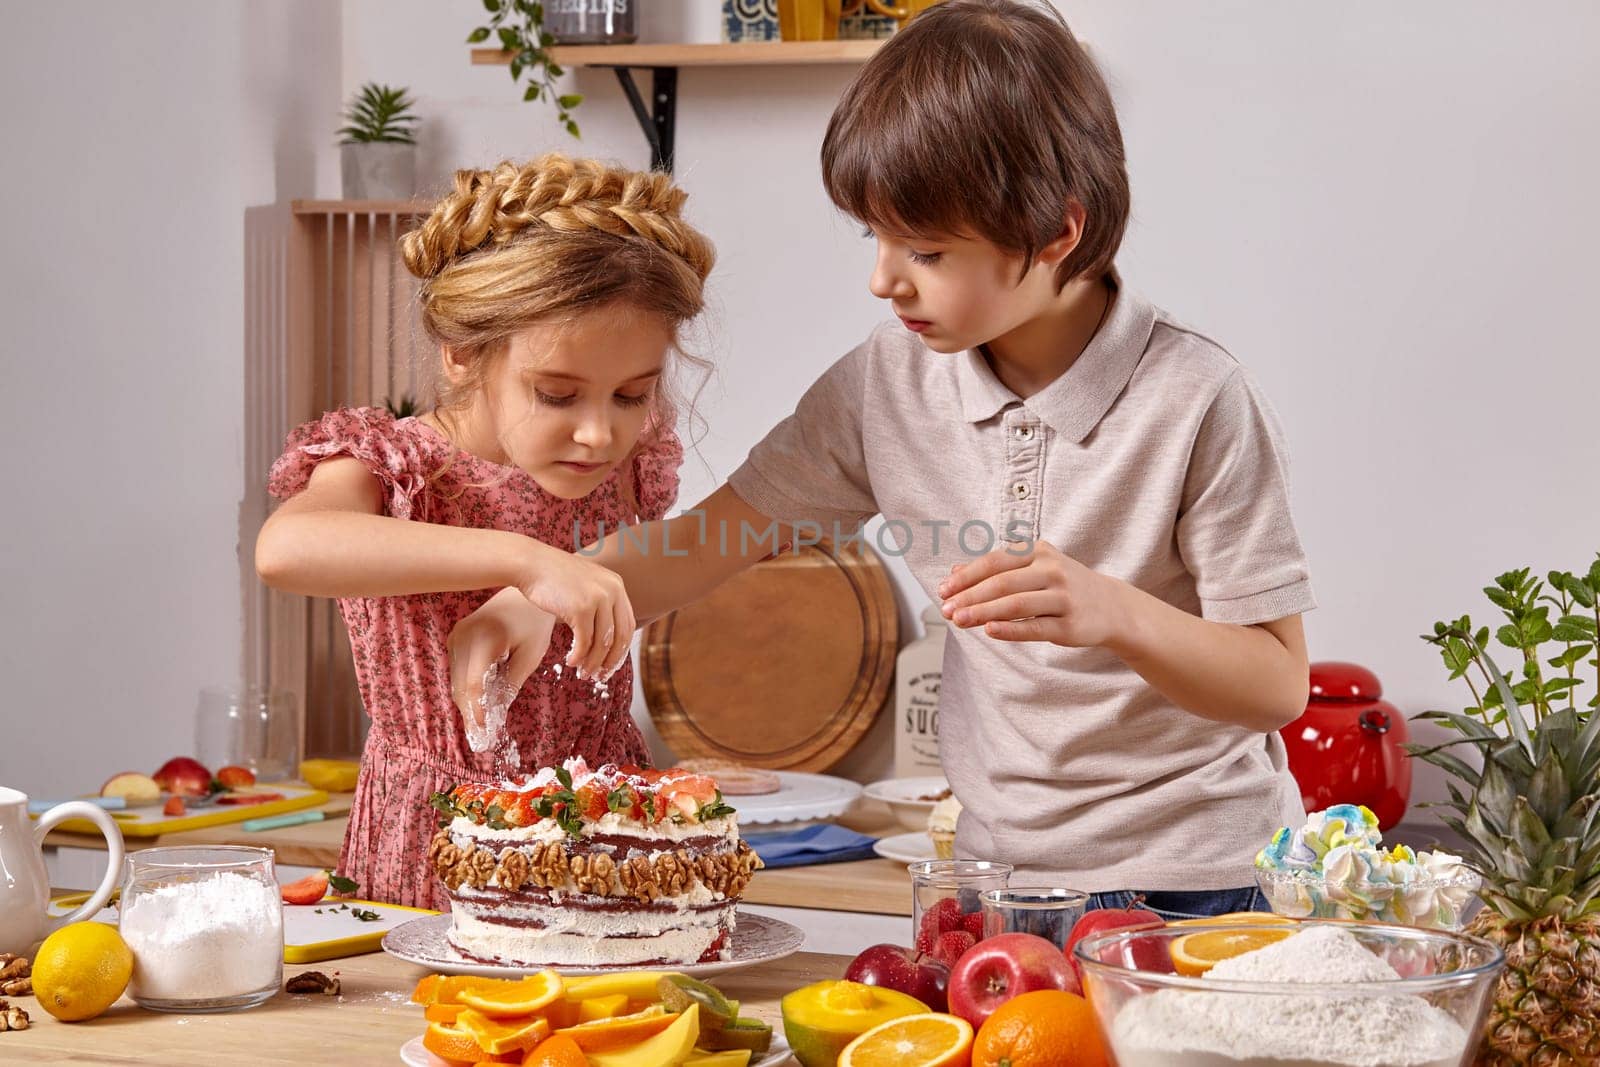 Kid dressed in a light t-shirt and jeans and a girl with a braid in her hair, wearing in a pink dress are making a cake at a kitchen, against a white wall with shelves on it. Children carefully sprinkle it with some powdered sugar.